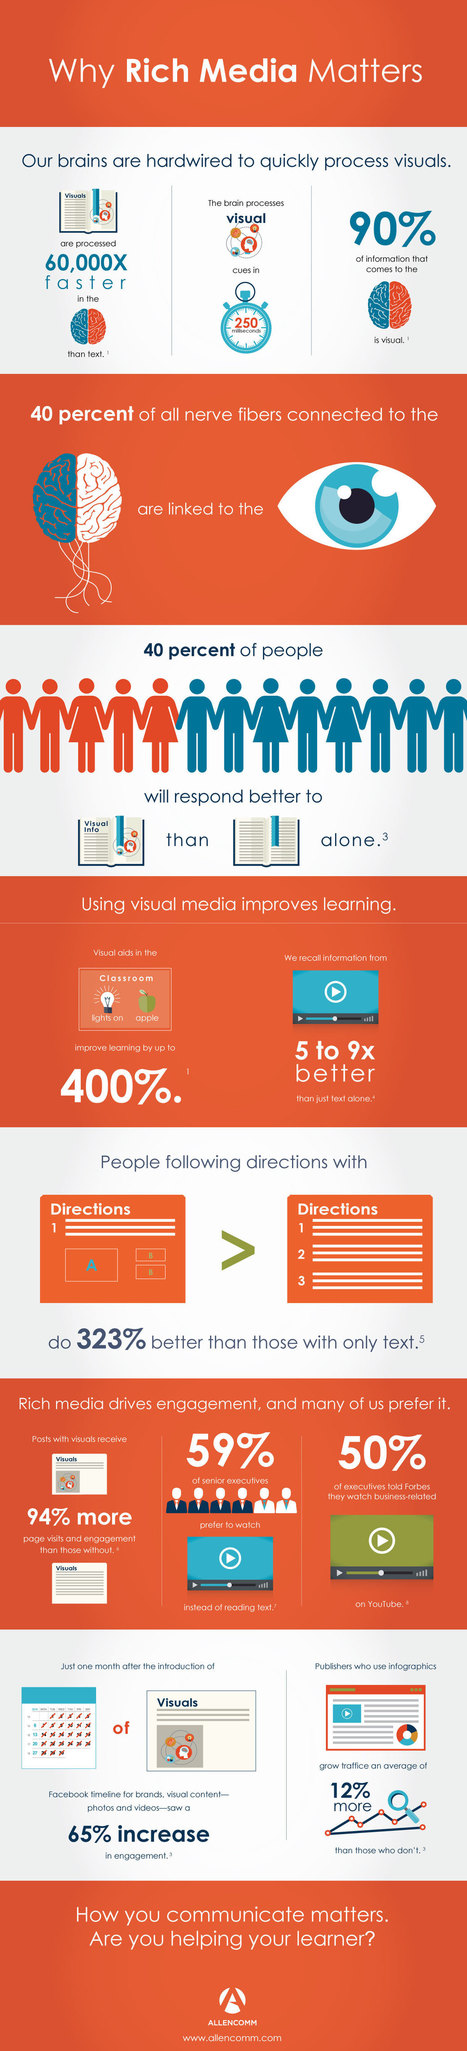 Boosting Learner Engagement with Rich Media Infographic | Infographic | gpmt | Scoop.it